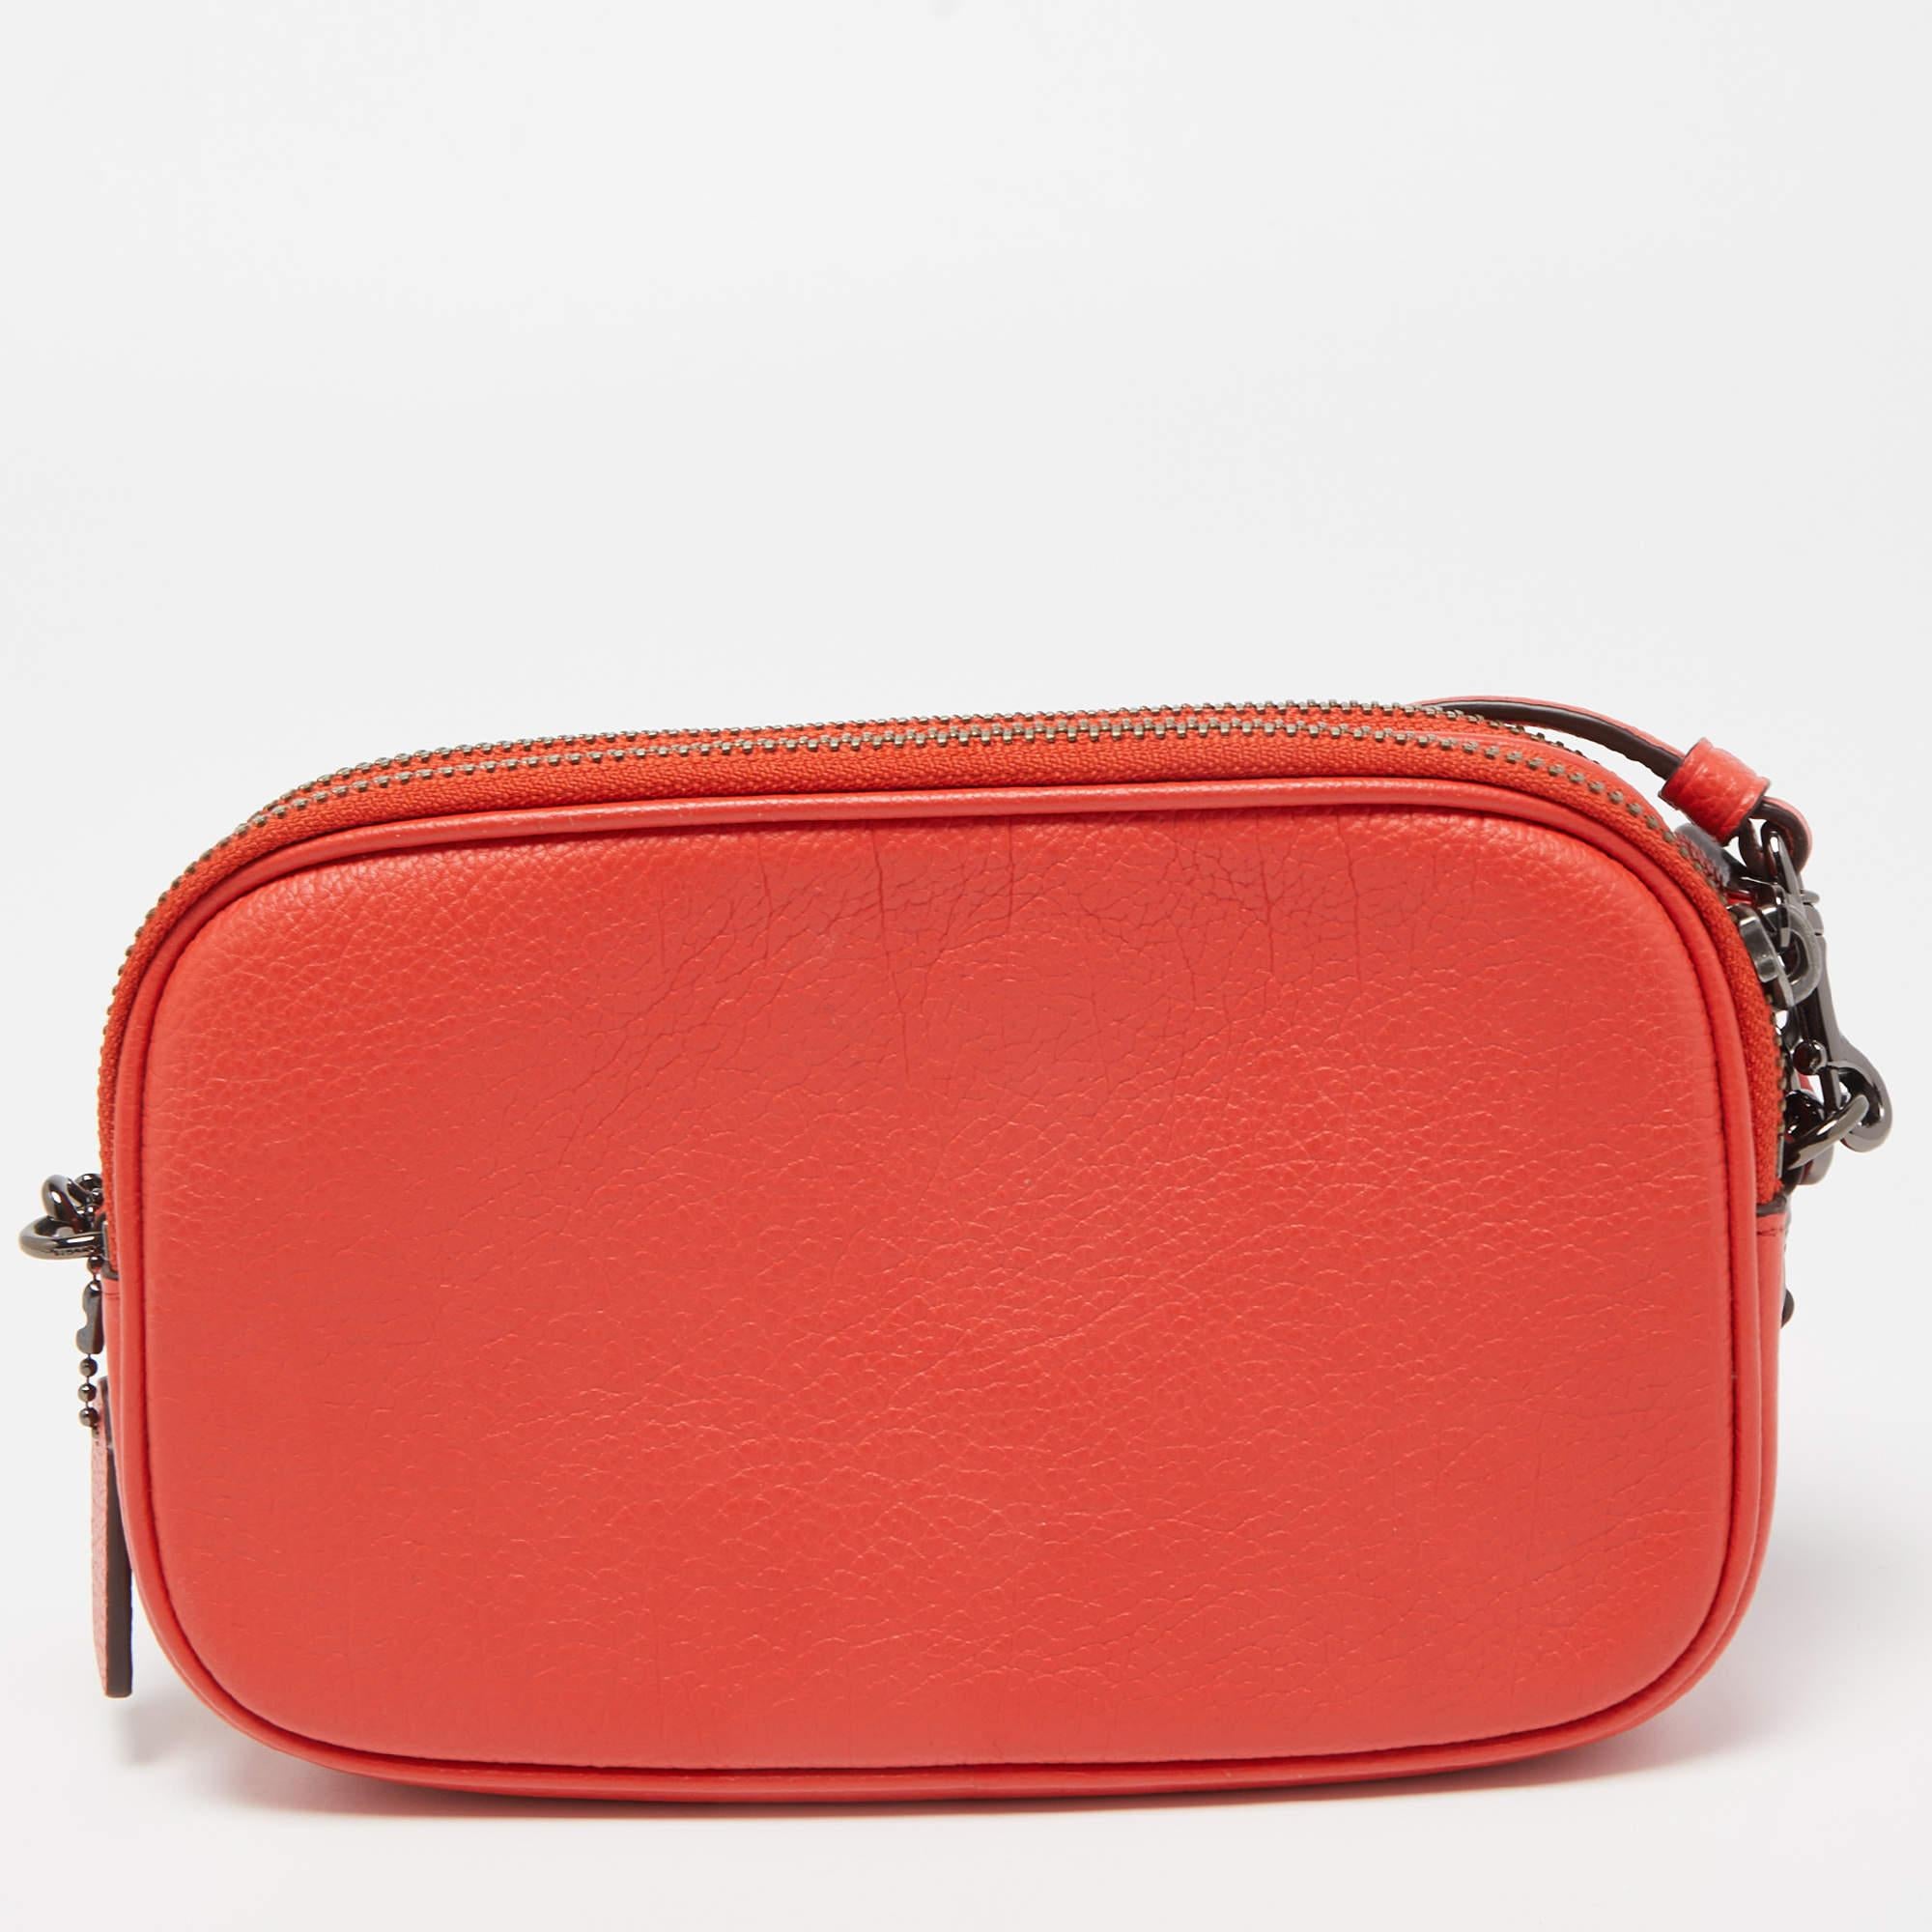 The Coach crossbody clutch is a stylish and compact accessory. Crafted from rich red coral leather, it features intricate embroidery, adding a touch of elegance. With a detachable crossbody strap, it offers versatility and convenience for any